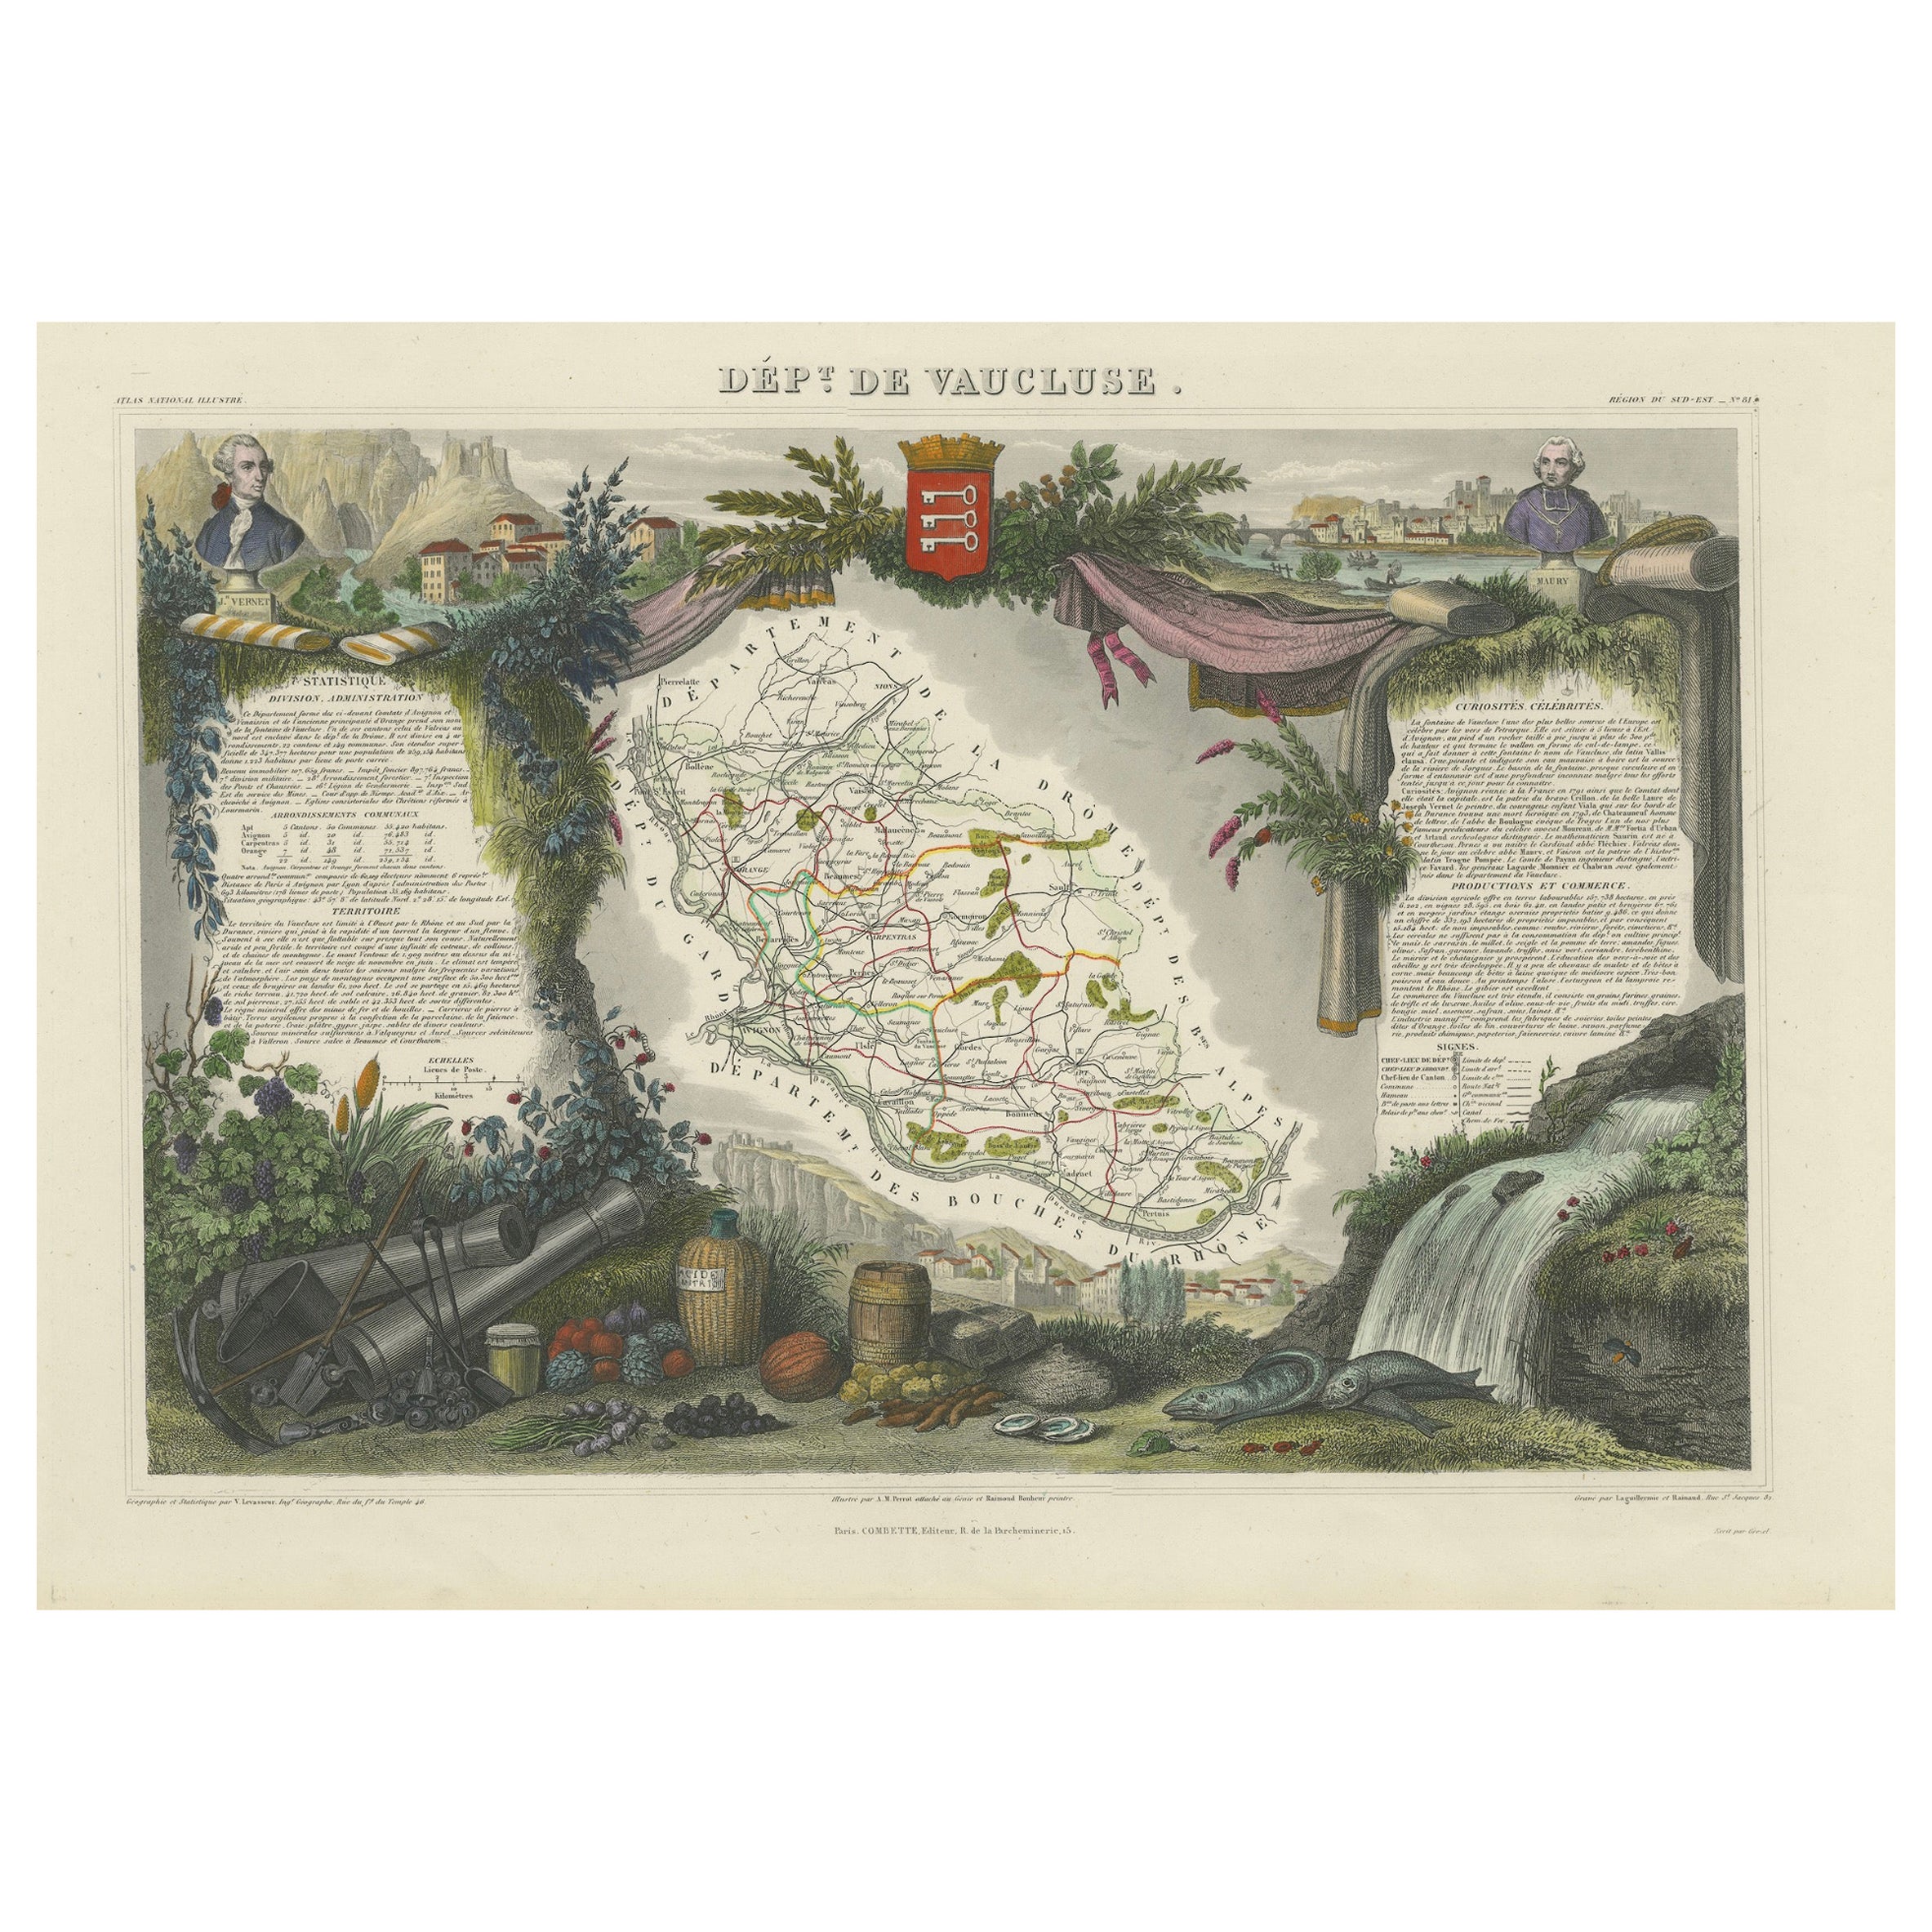 Old Map of Vaucluse, France: A Cartographic Celebration of Viticulture, 1852